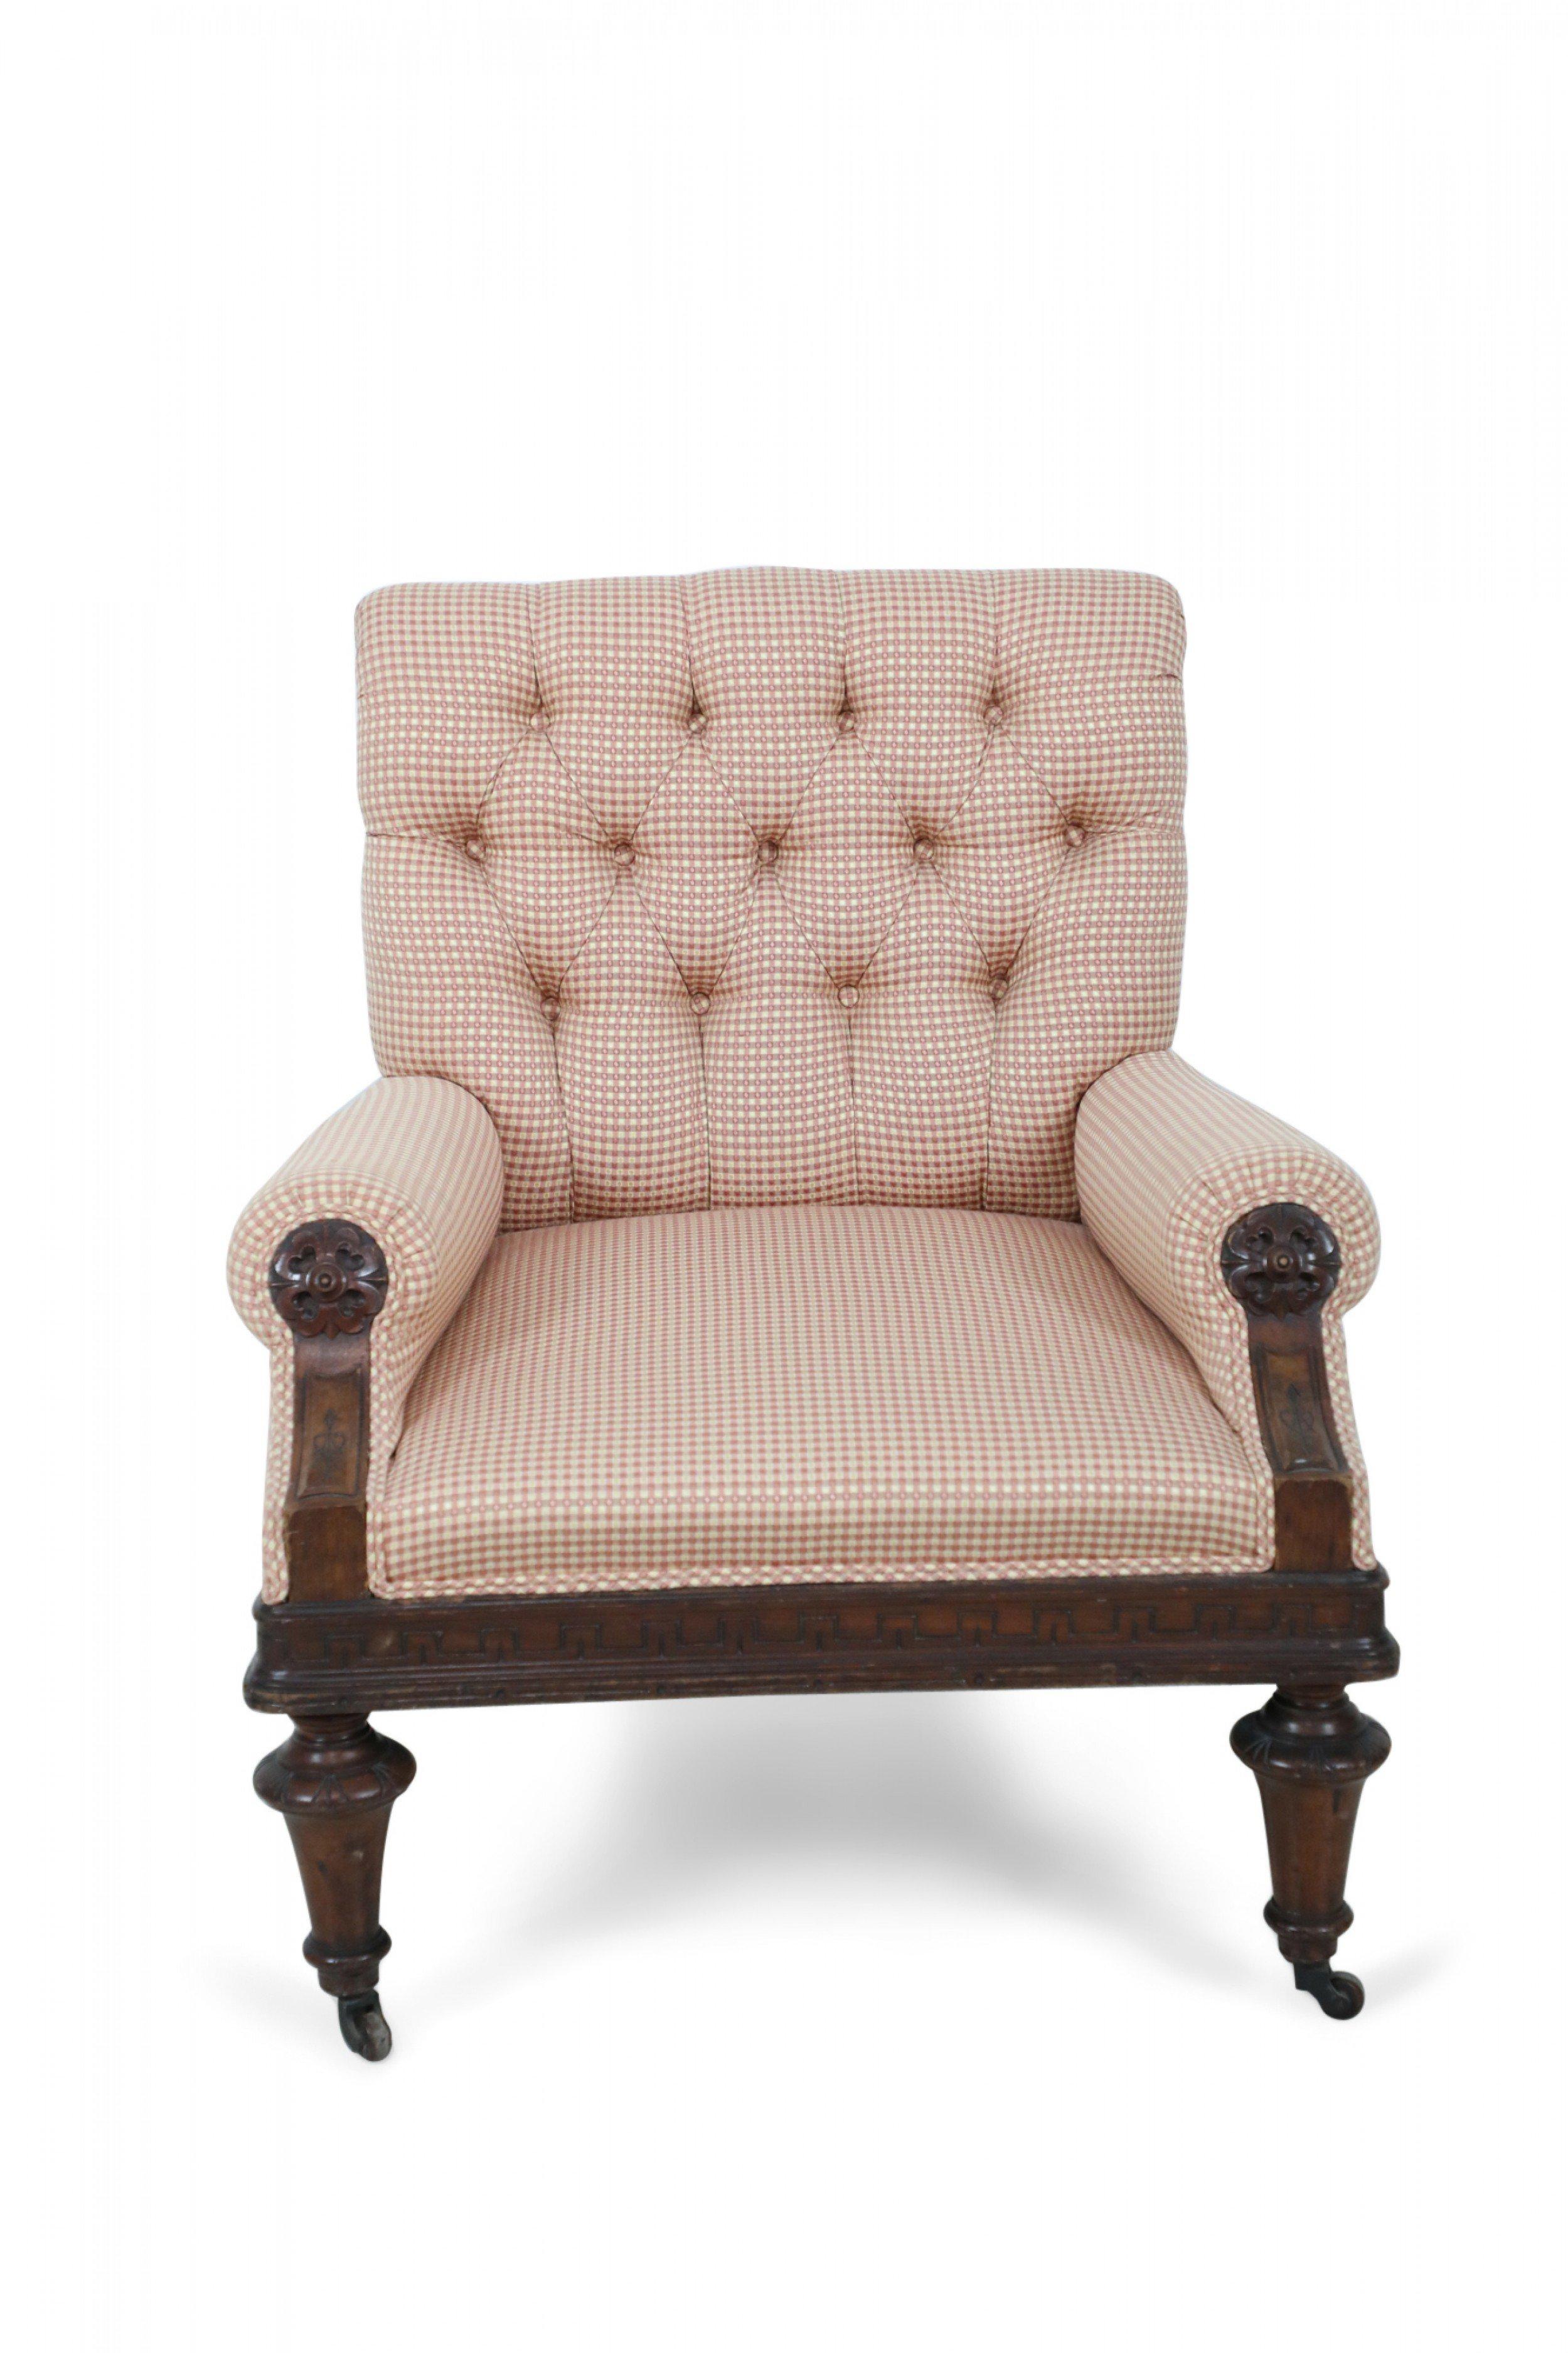 American Victorian Tufted Upholstered Red and Beige Checkered Mahogany Armchair For Sale 9